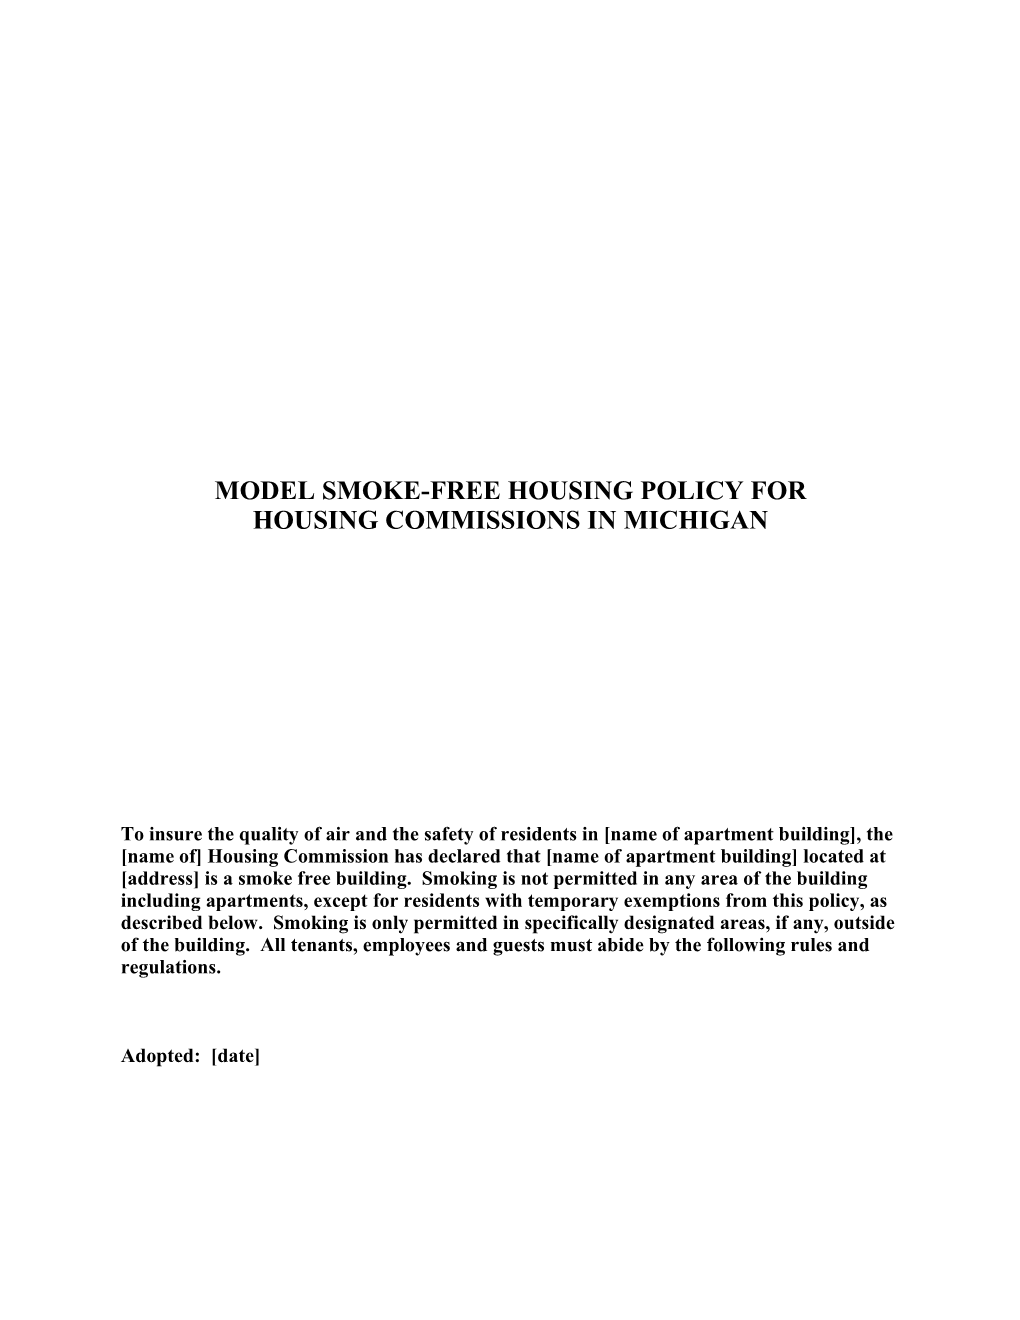 Model Smoke-Free Housing Policy For